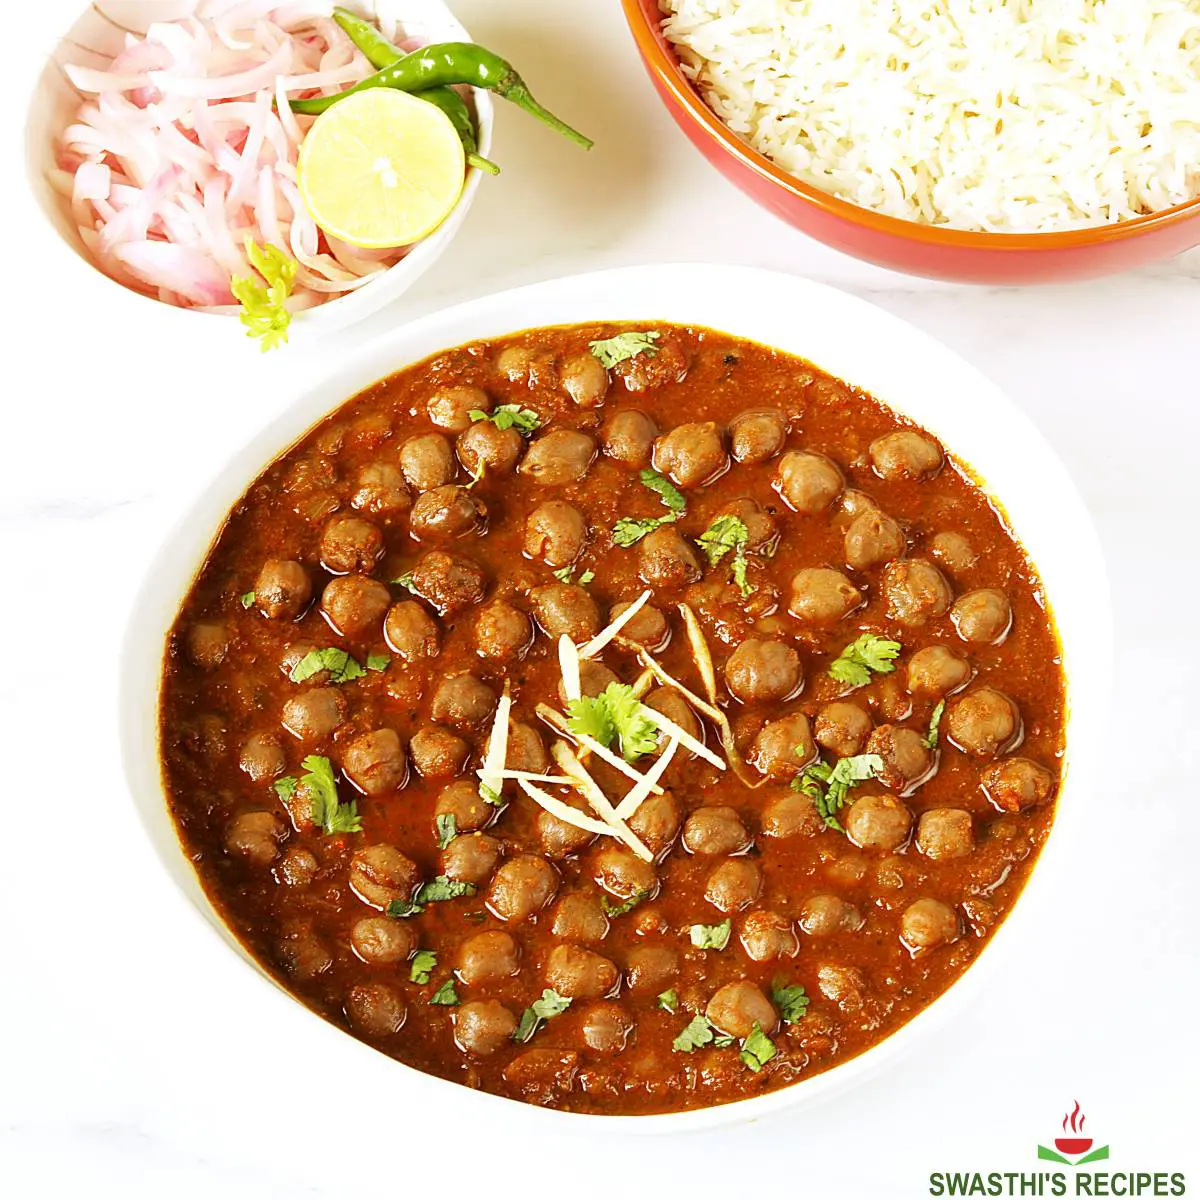 chole recipe made with chickpeas, spices and herbs